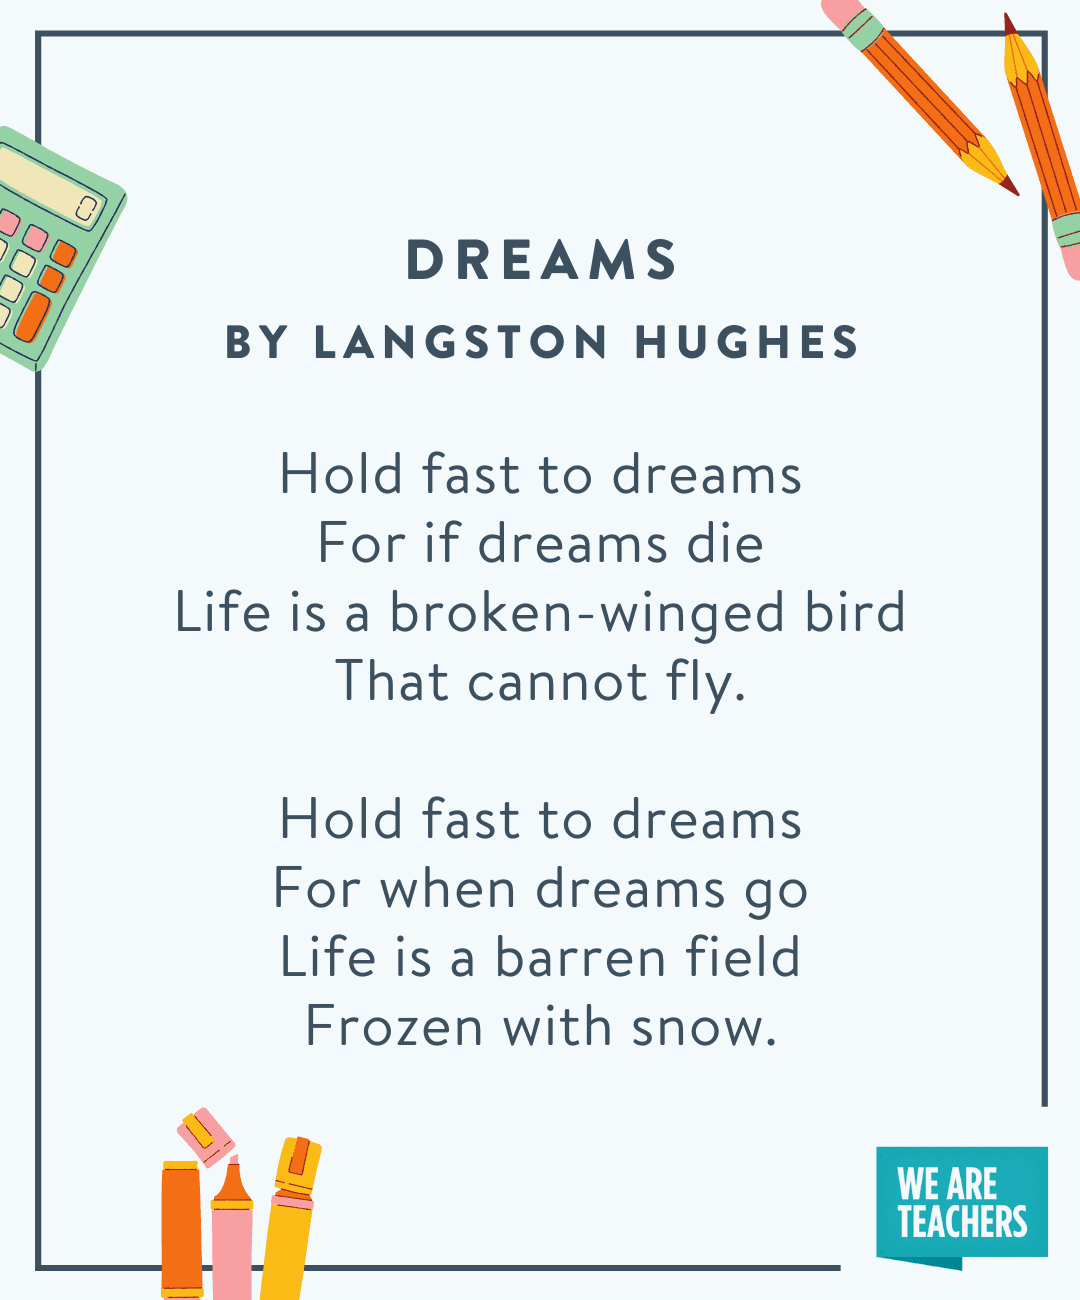 Dreams  by Langston Hughes -- back to school poems